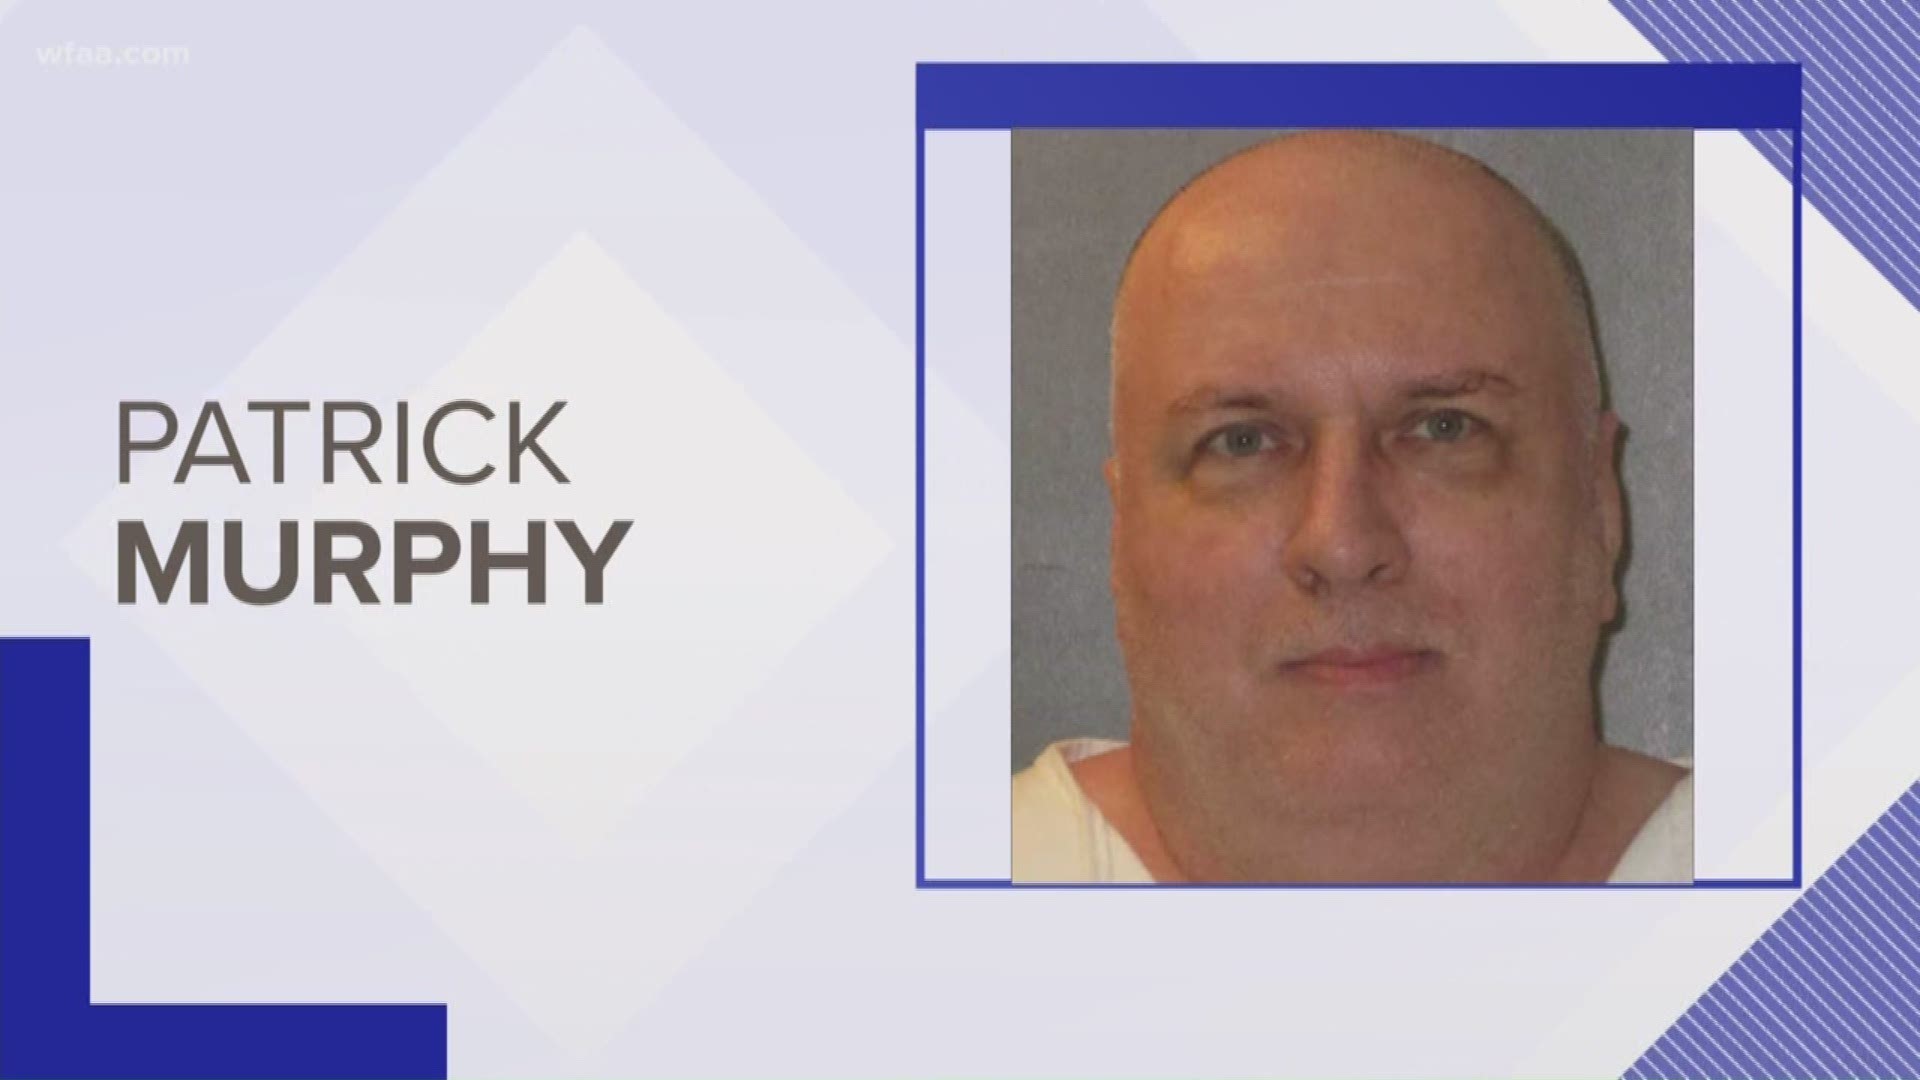 Patrick Murphy was part of a group that killed an Irving police officer in 2000.